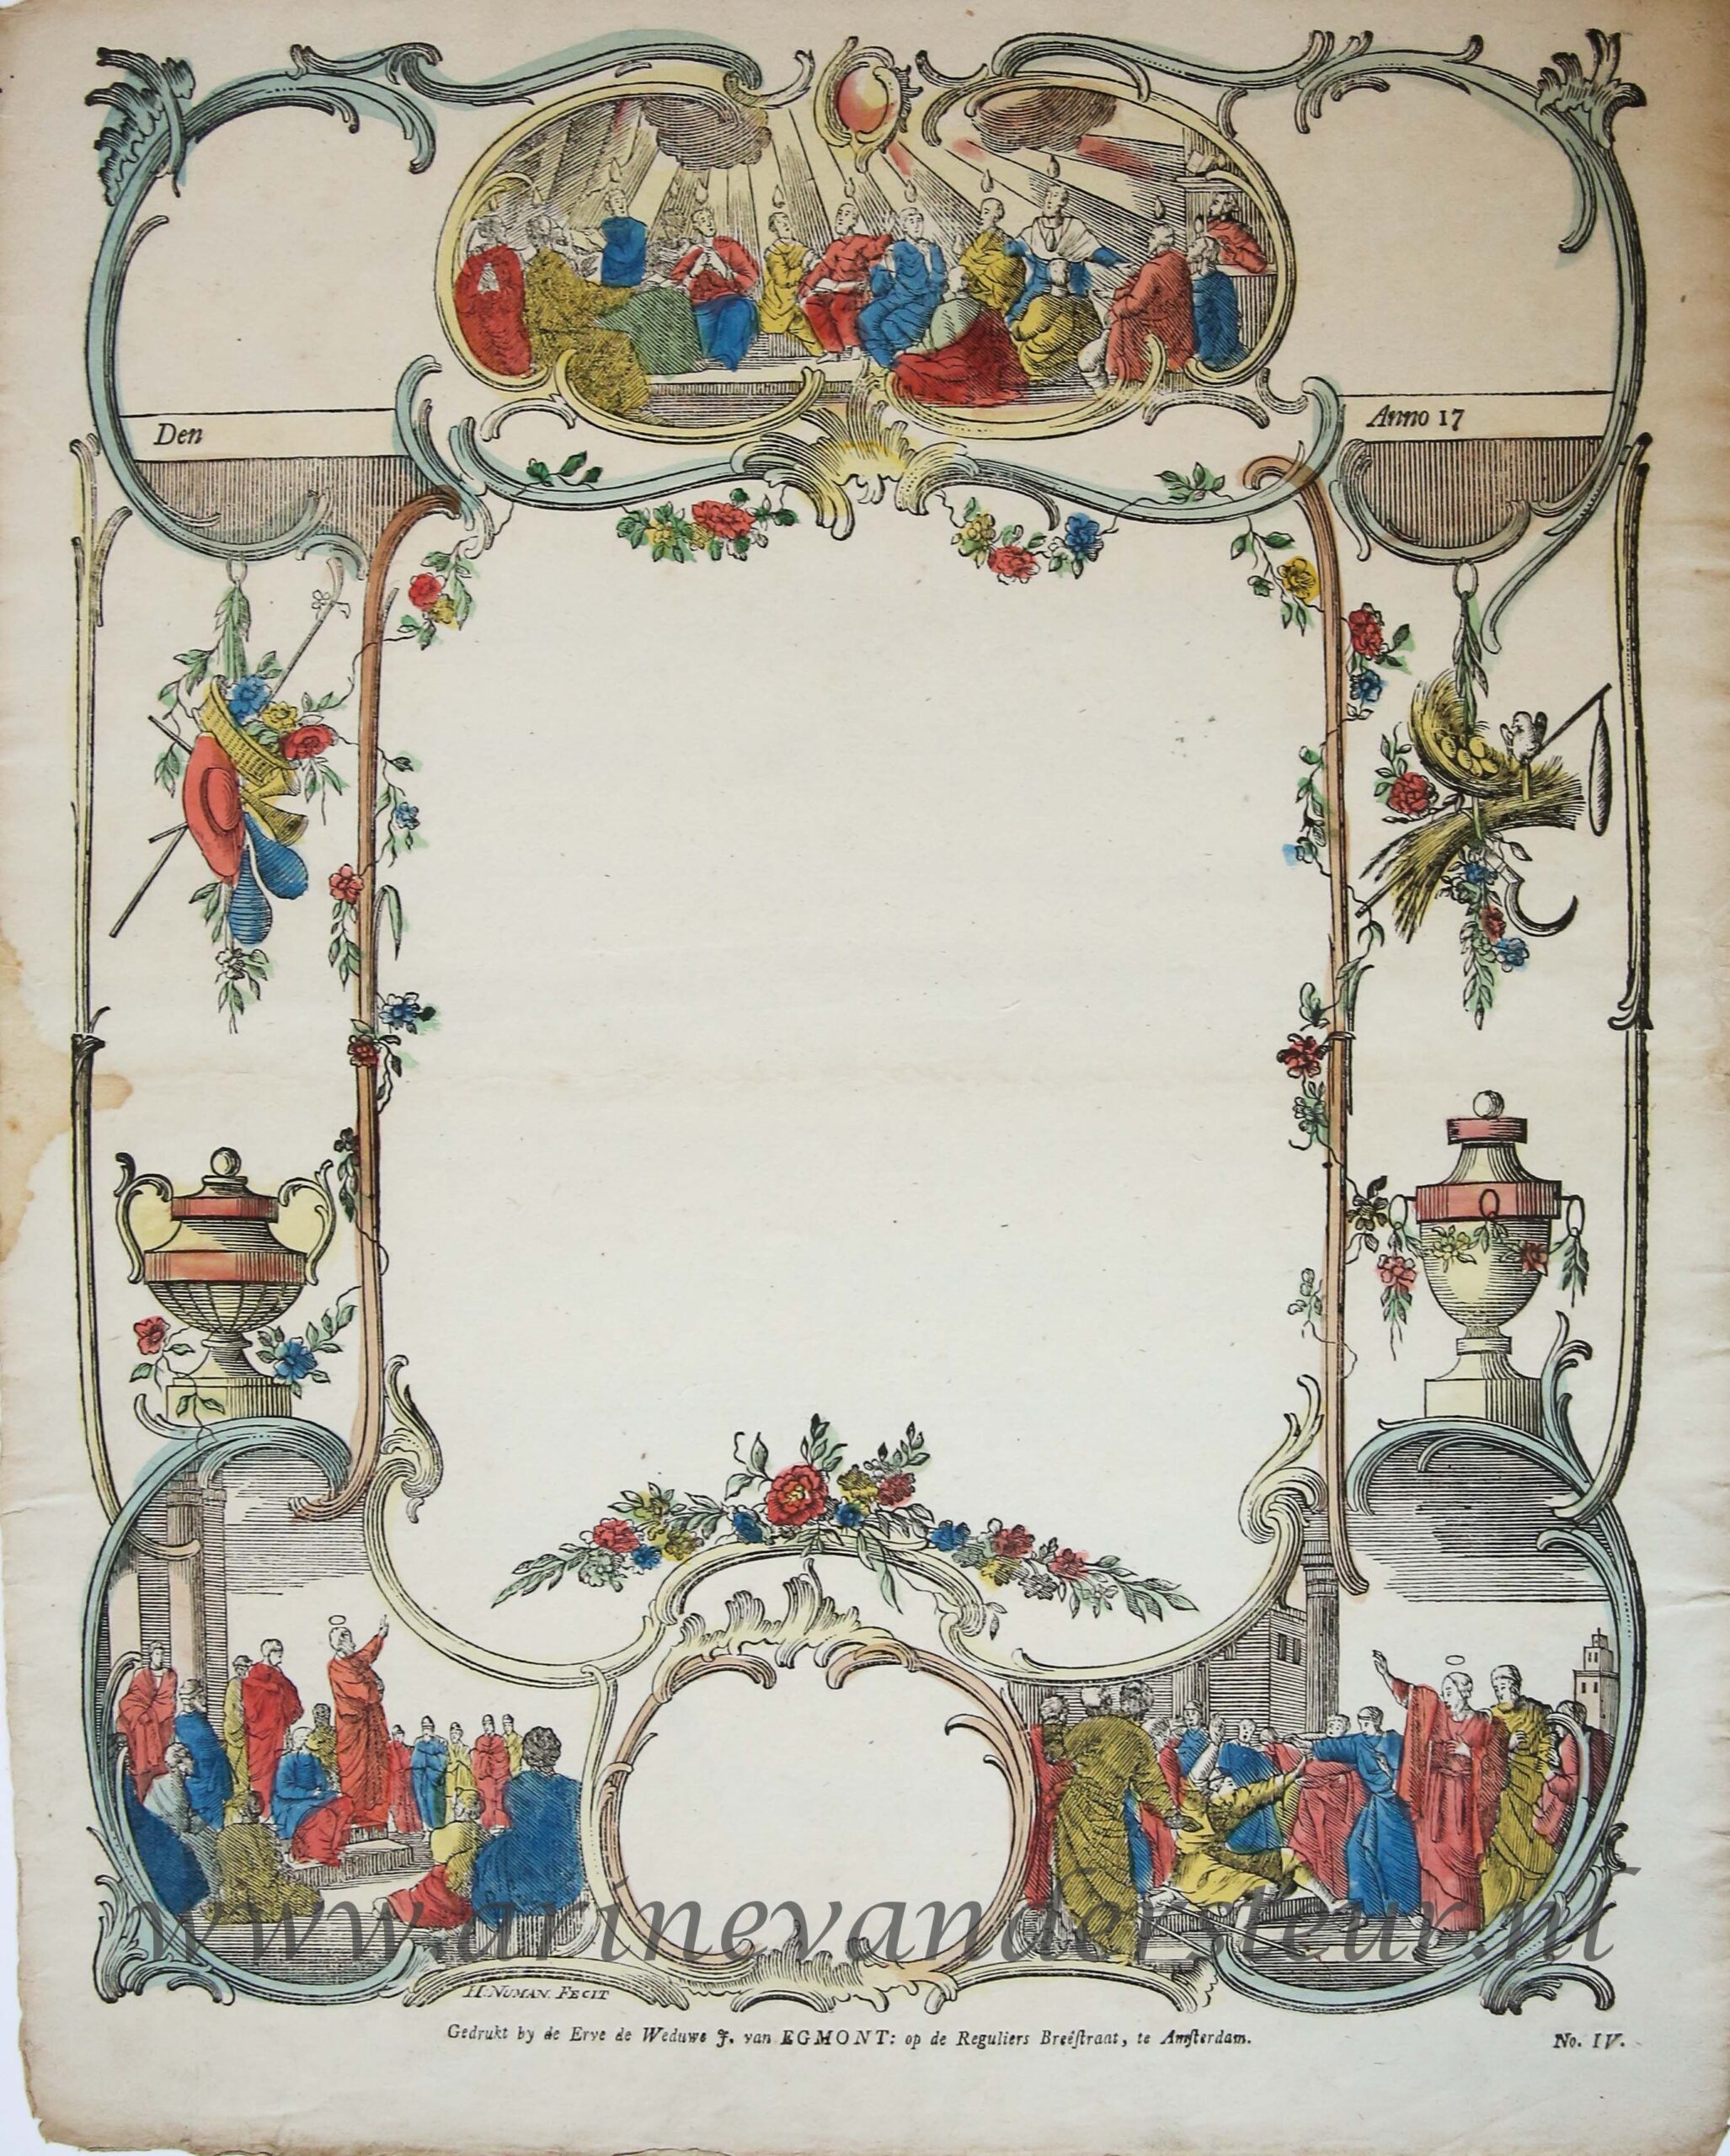 [Wenskaart / Wish Card, 1750] Hand colored blank decorative card with scenes from the New Testament, published ca. 1750, 1 p.